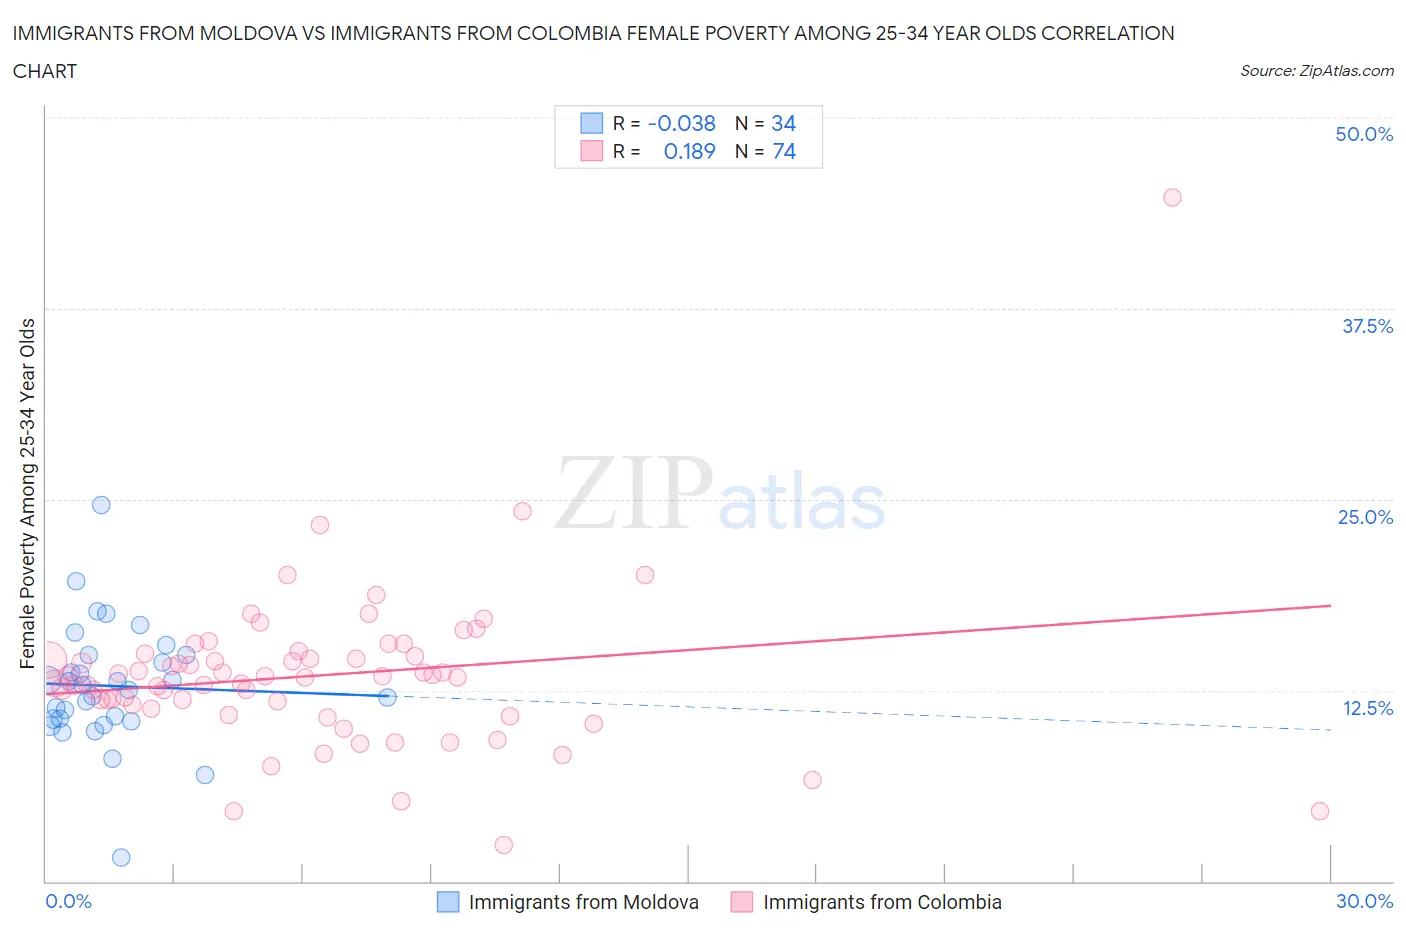 Immigrants from Moldova vs Immigrants from Colombia Female Poverty Among 25-34 Year Olds